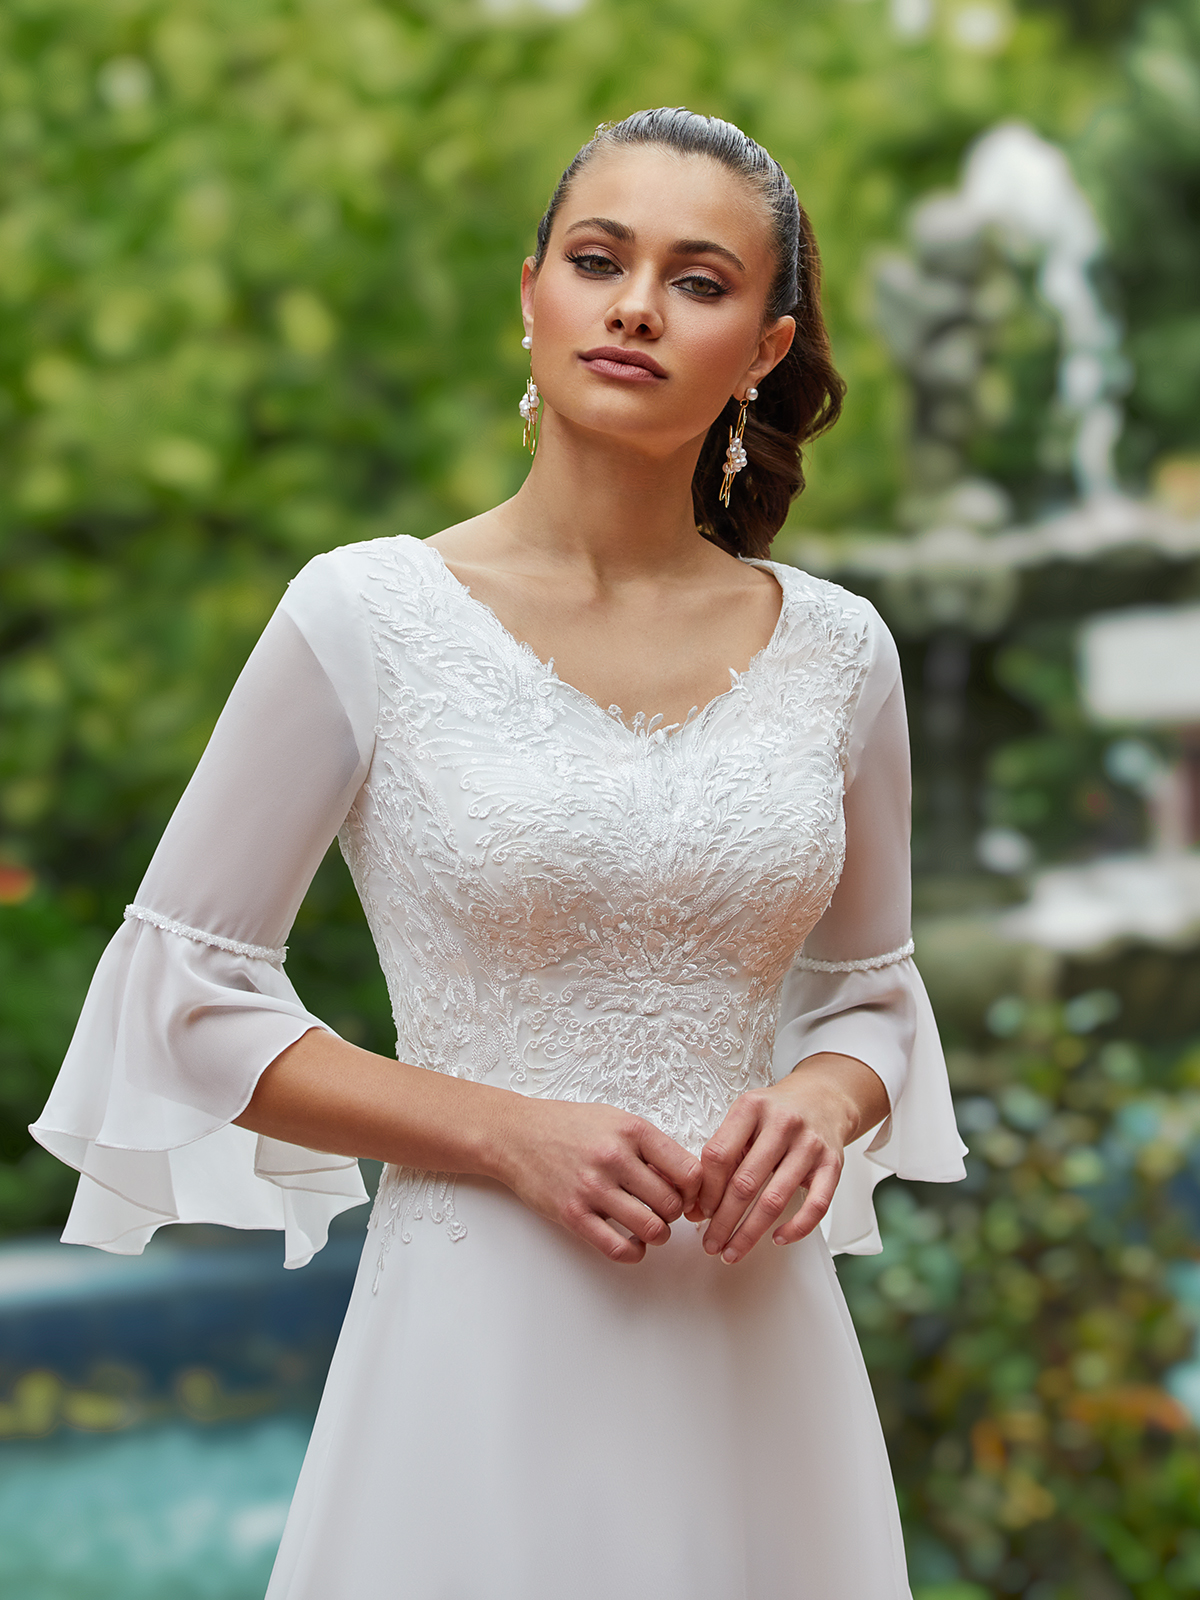 Woman standing outside in a lace and chiffon wedding gown with flowing bell sleeves